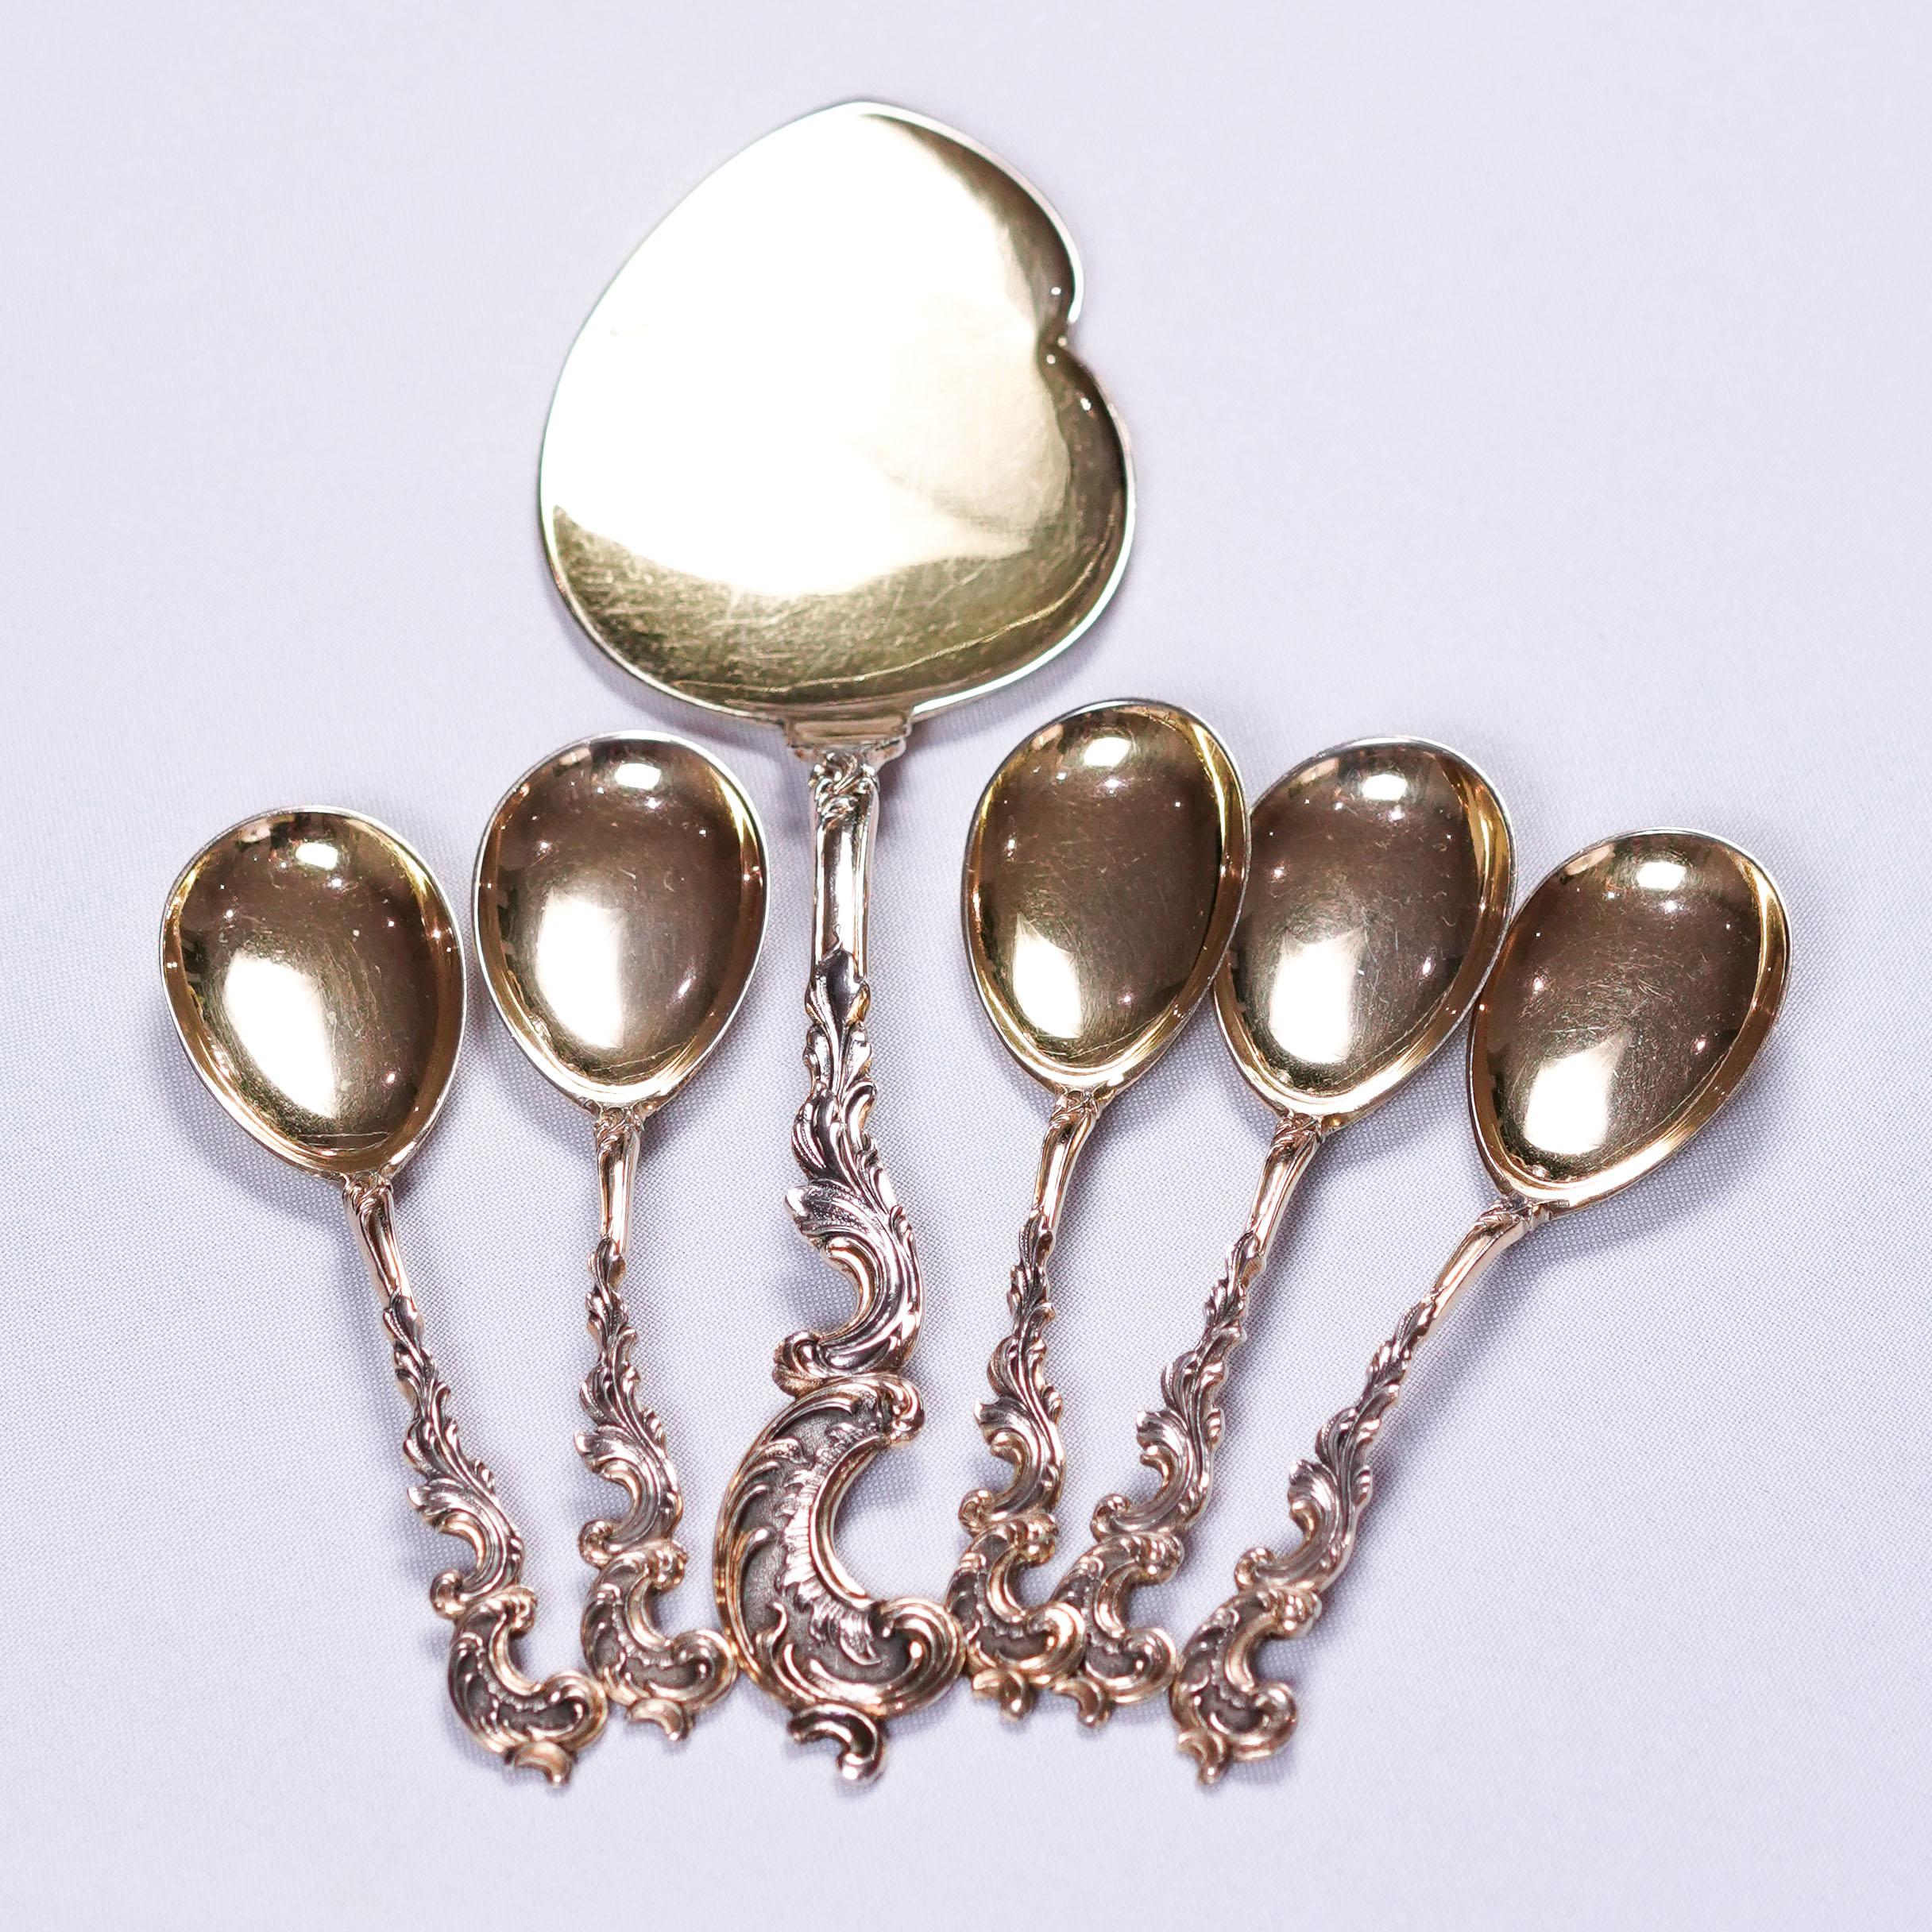 Antique German Solid Silver Icecream Server & Spoons in Rococo Style - c.1900 For Sale 3